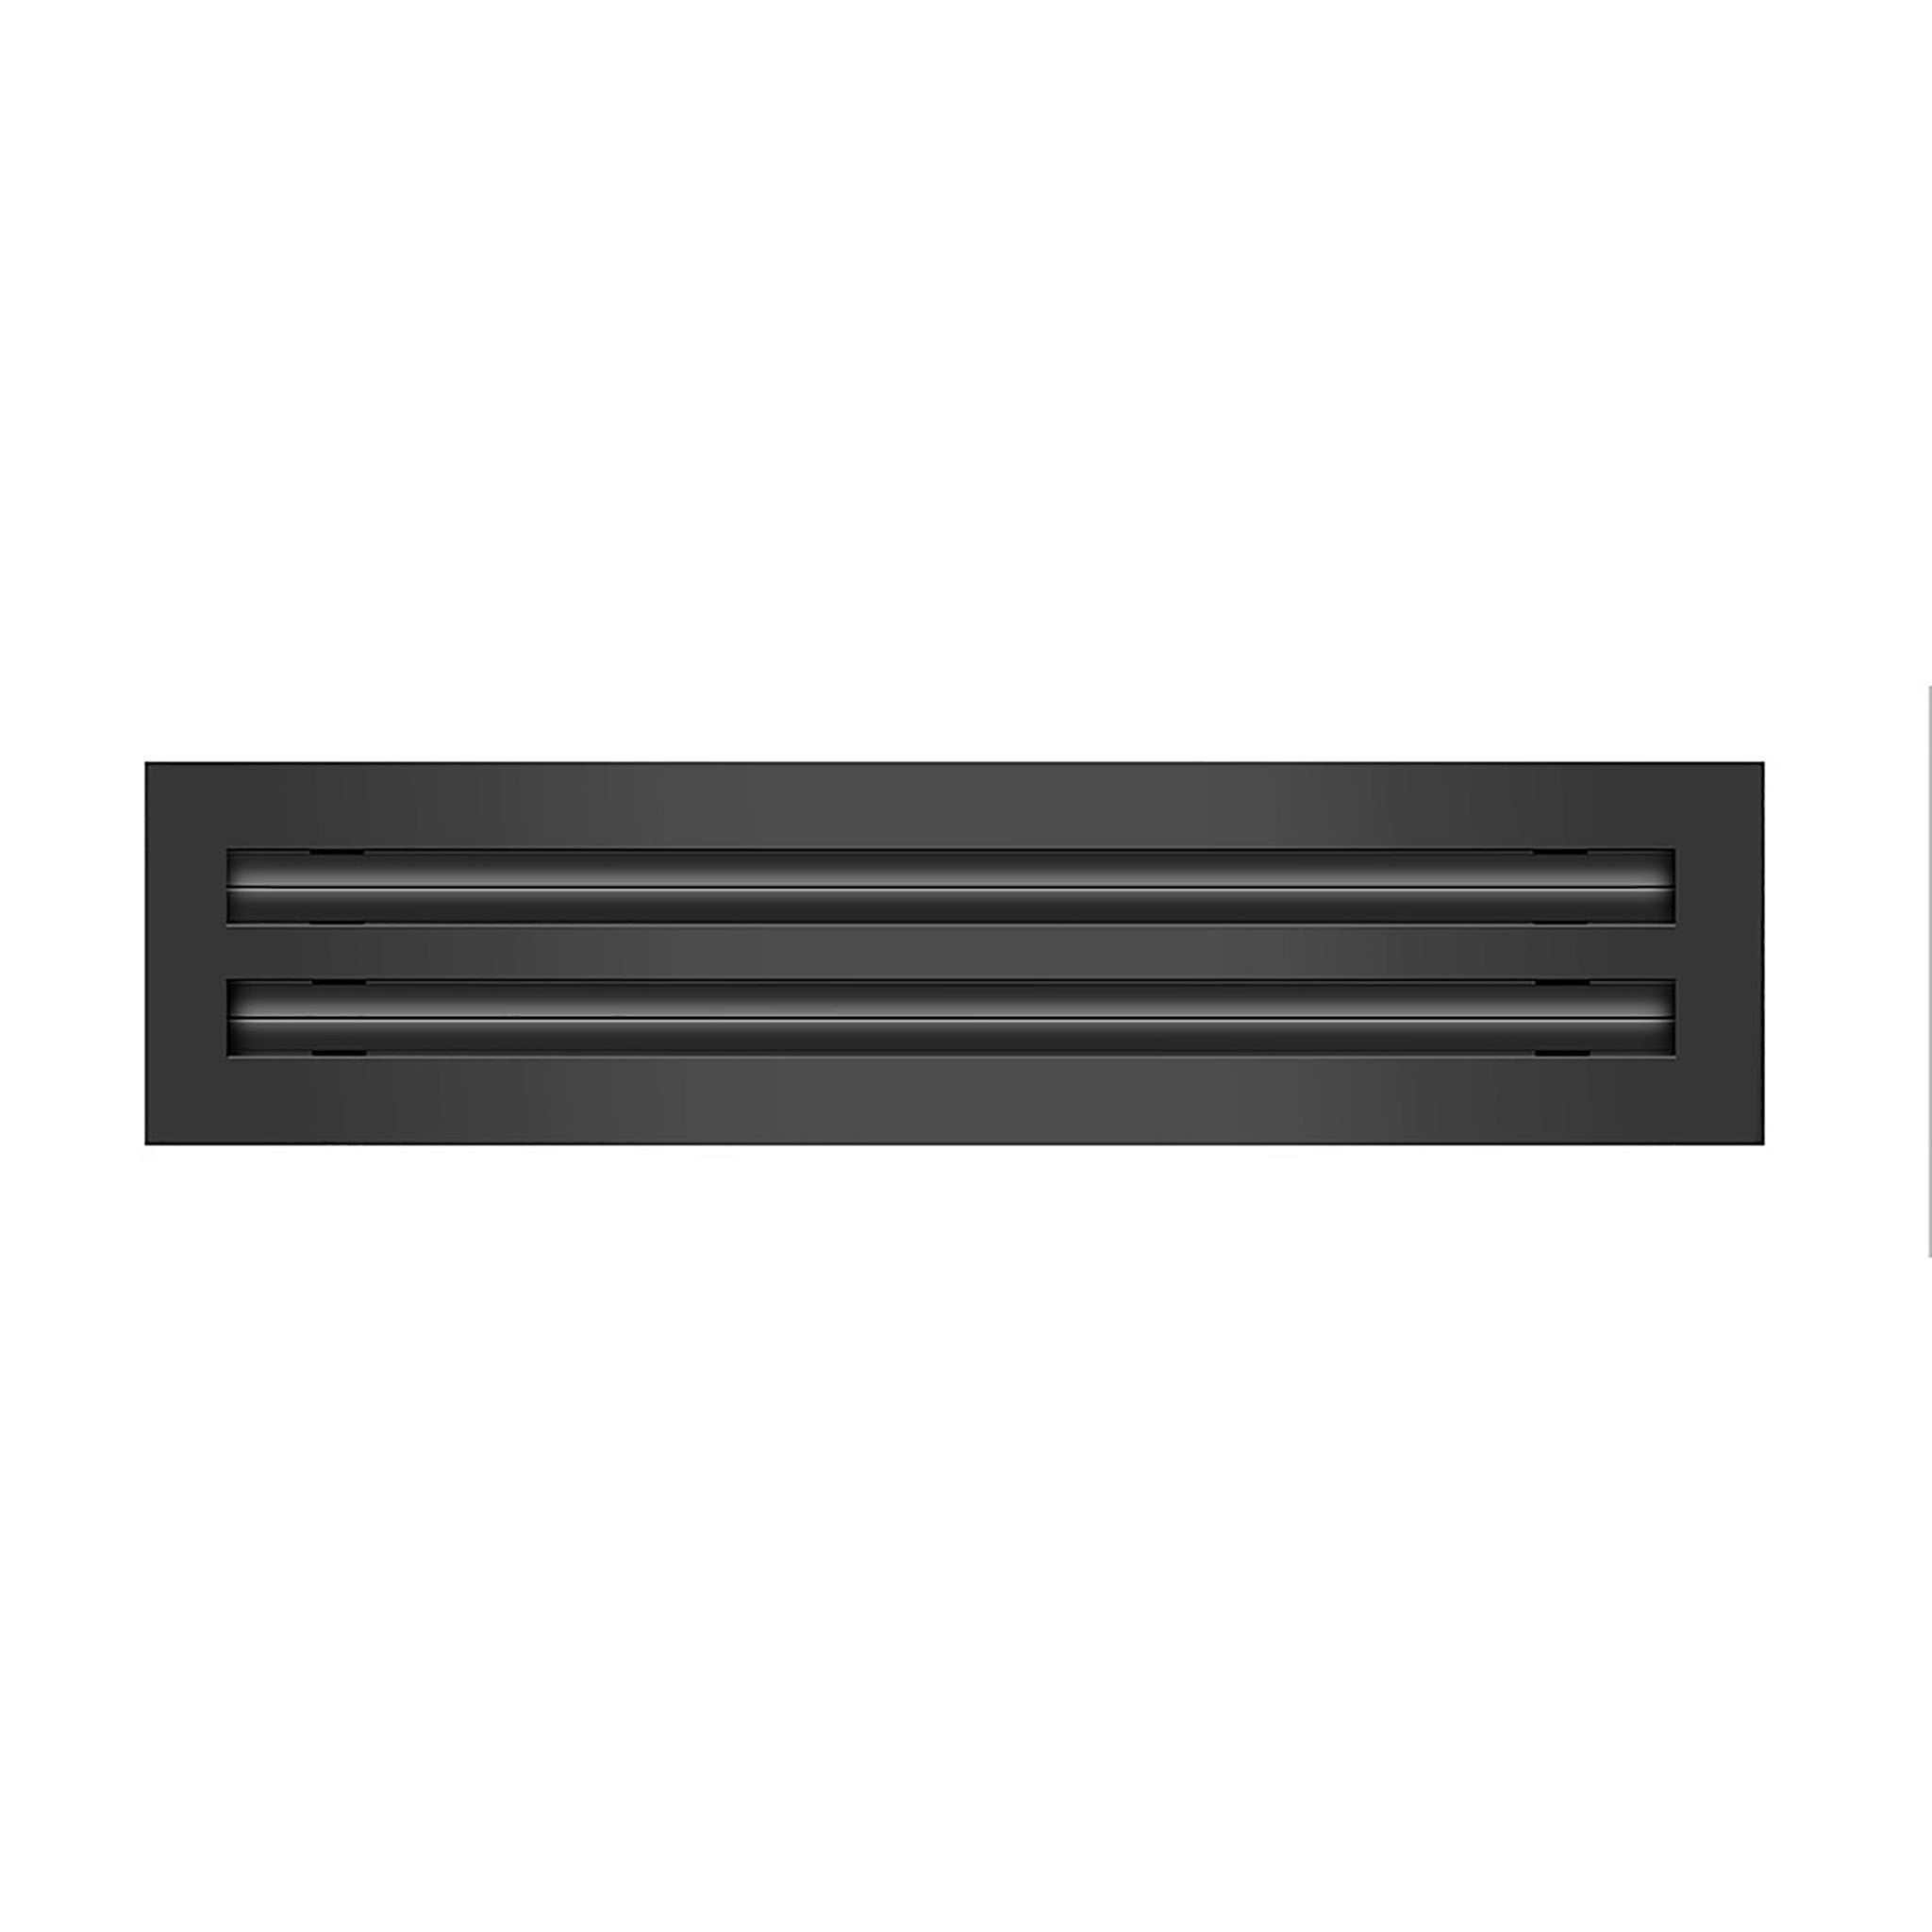 Front of 18 Inch 2 Slot Linear Air Vent Cover Black - 18 Inch 2 Slot Linear Diffuser Black - Texas Buildmart